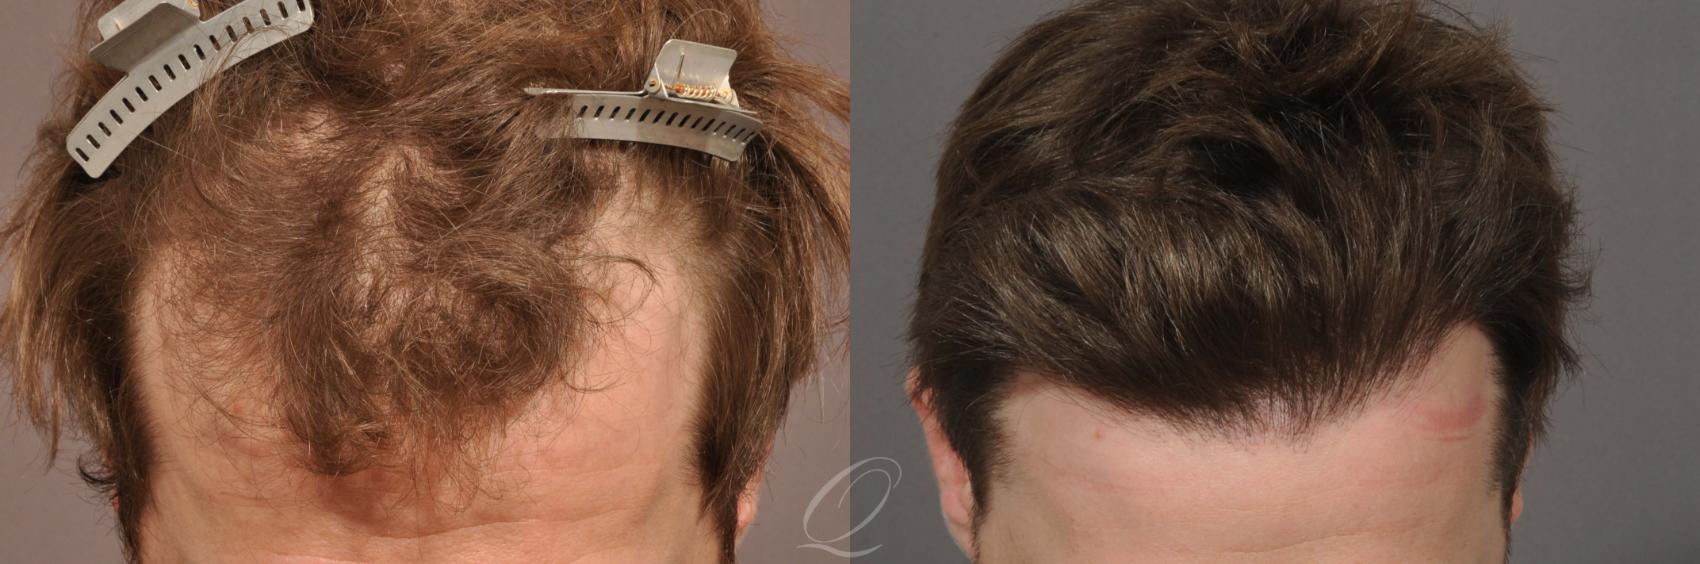 FUT Case 1023 Before & After View #2 | Rochester, NY | Quatela Center for Hair Restoration